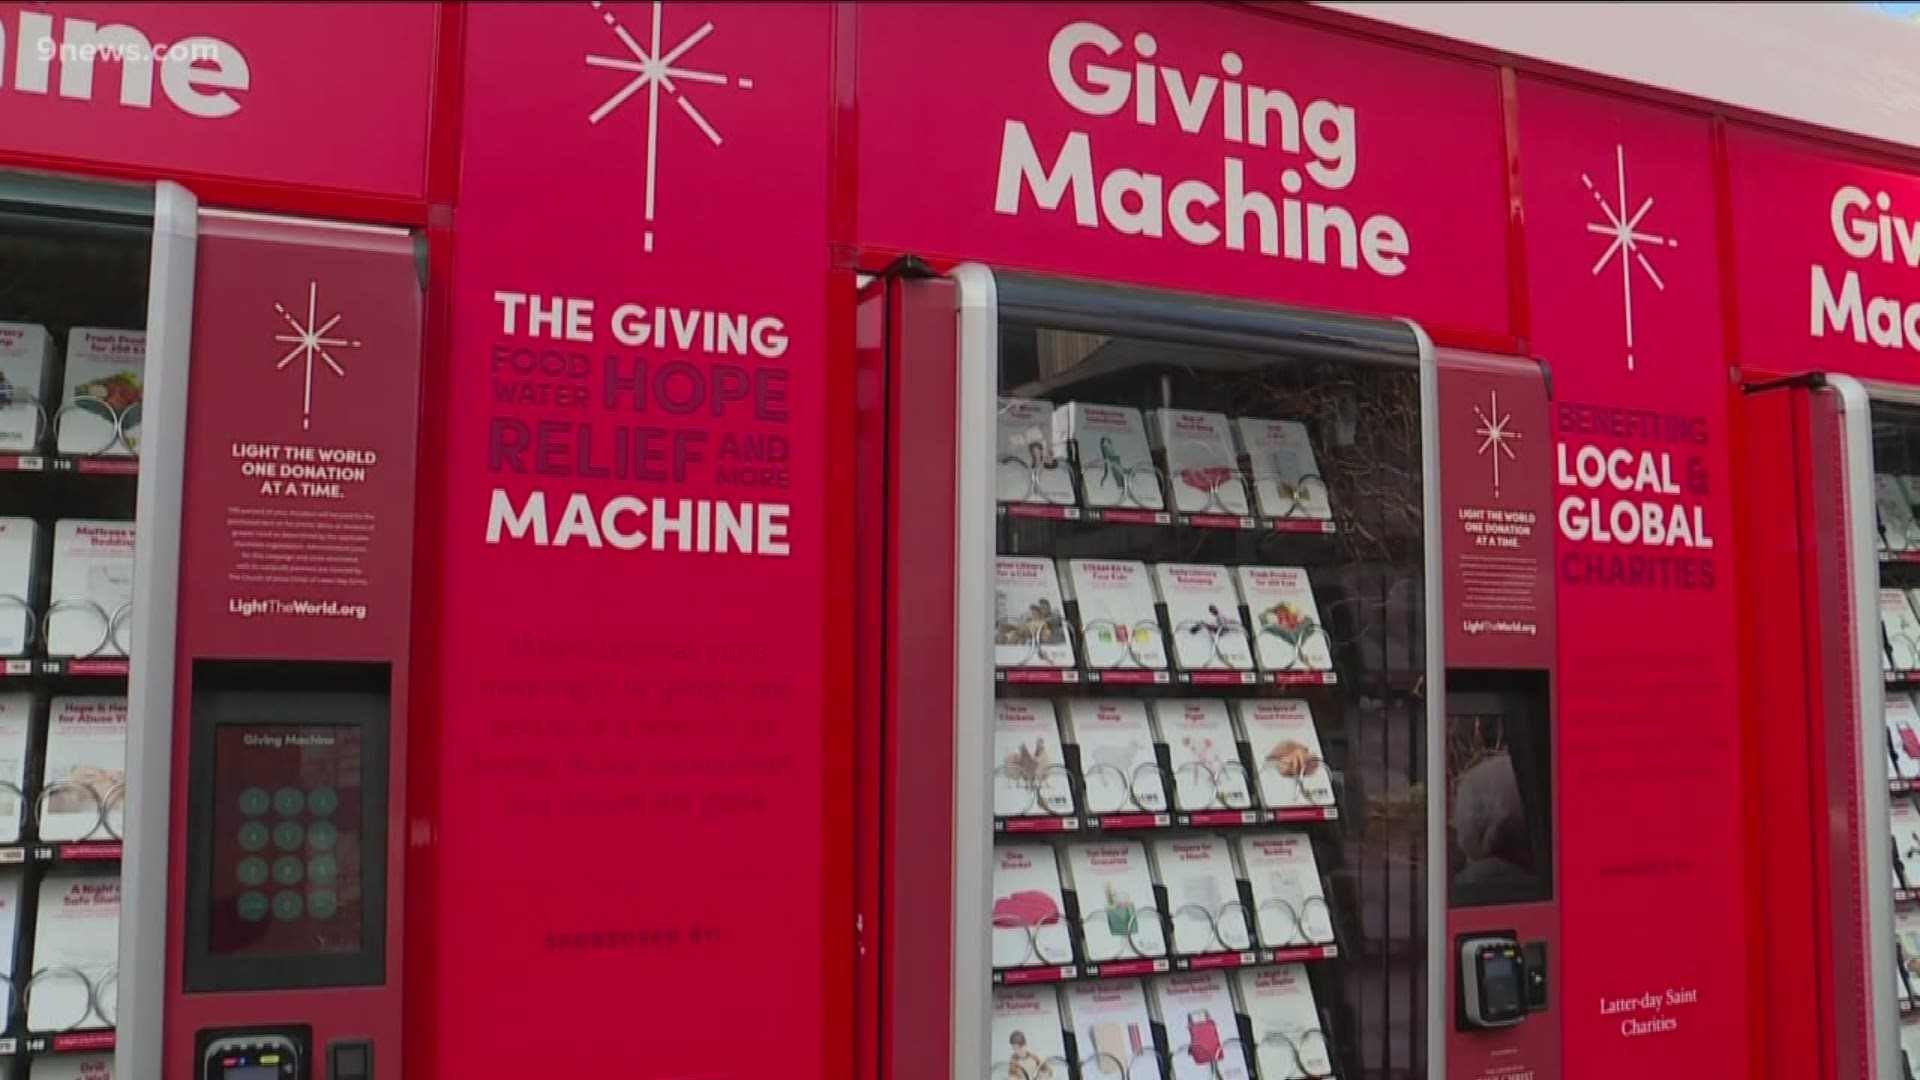 There’s a new way to give monetary donations this holiday season in downtown Denver: Think vending machines for charity.